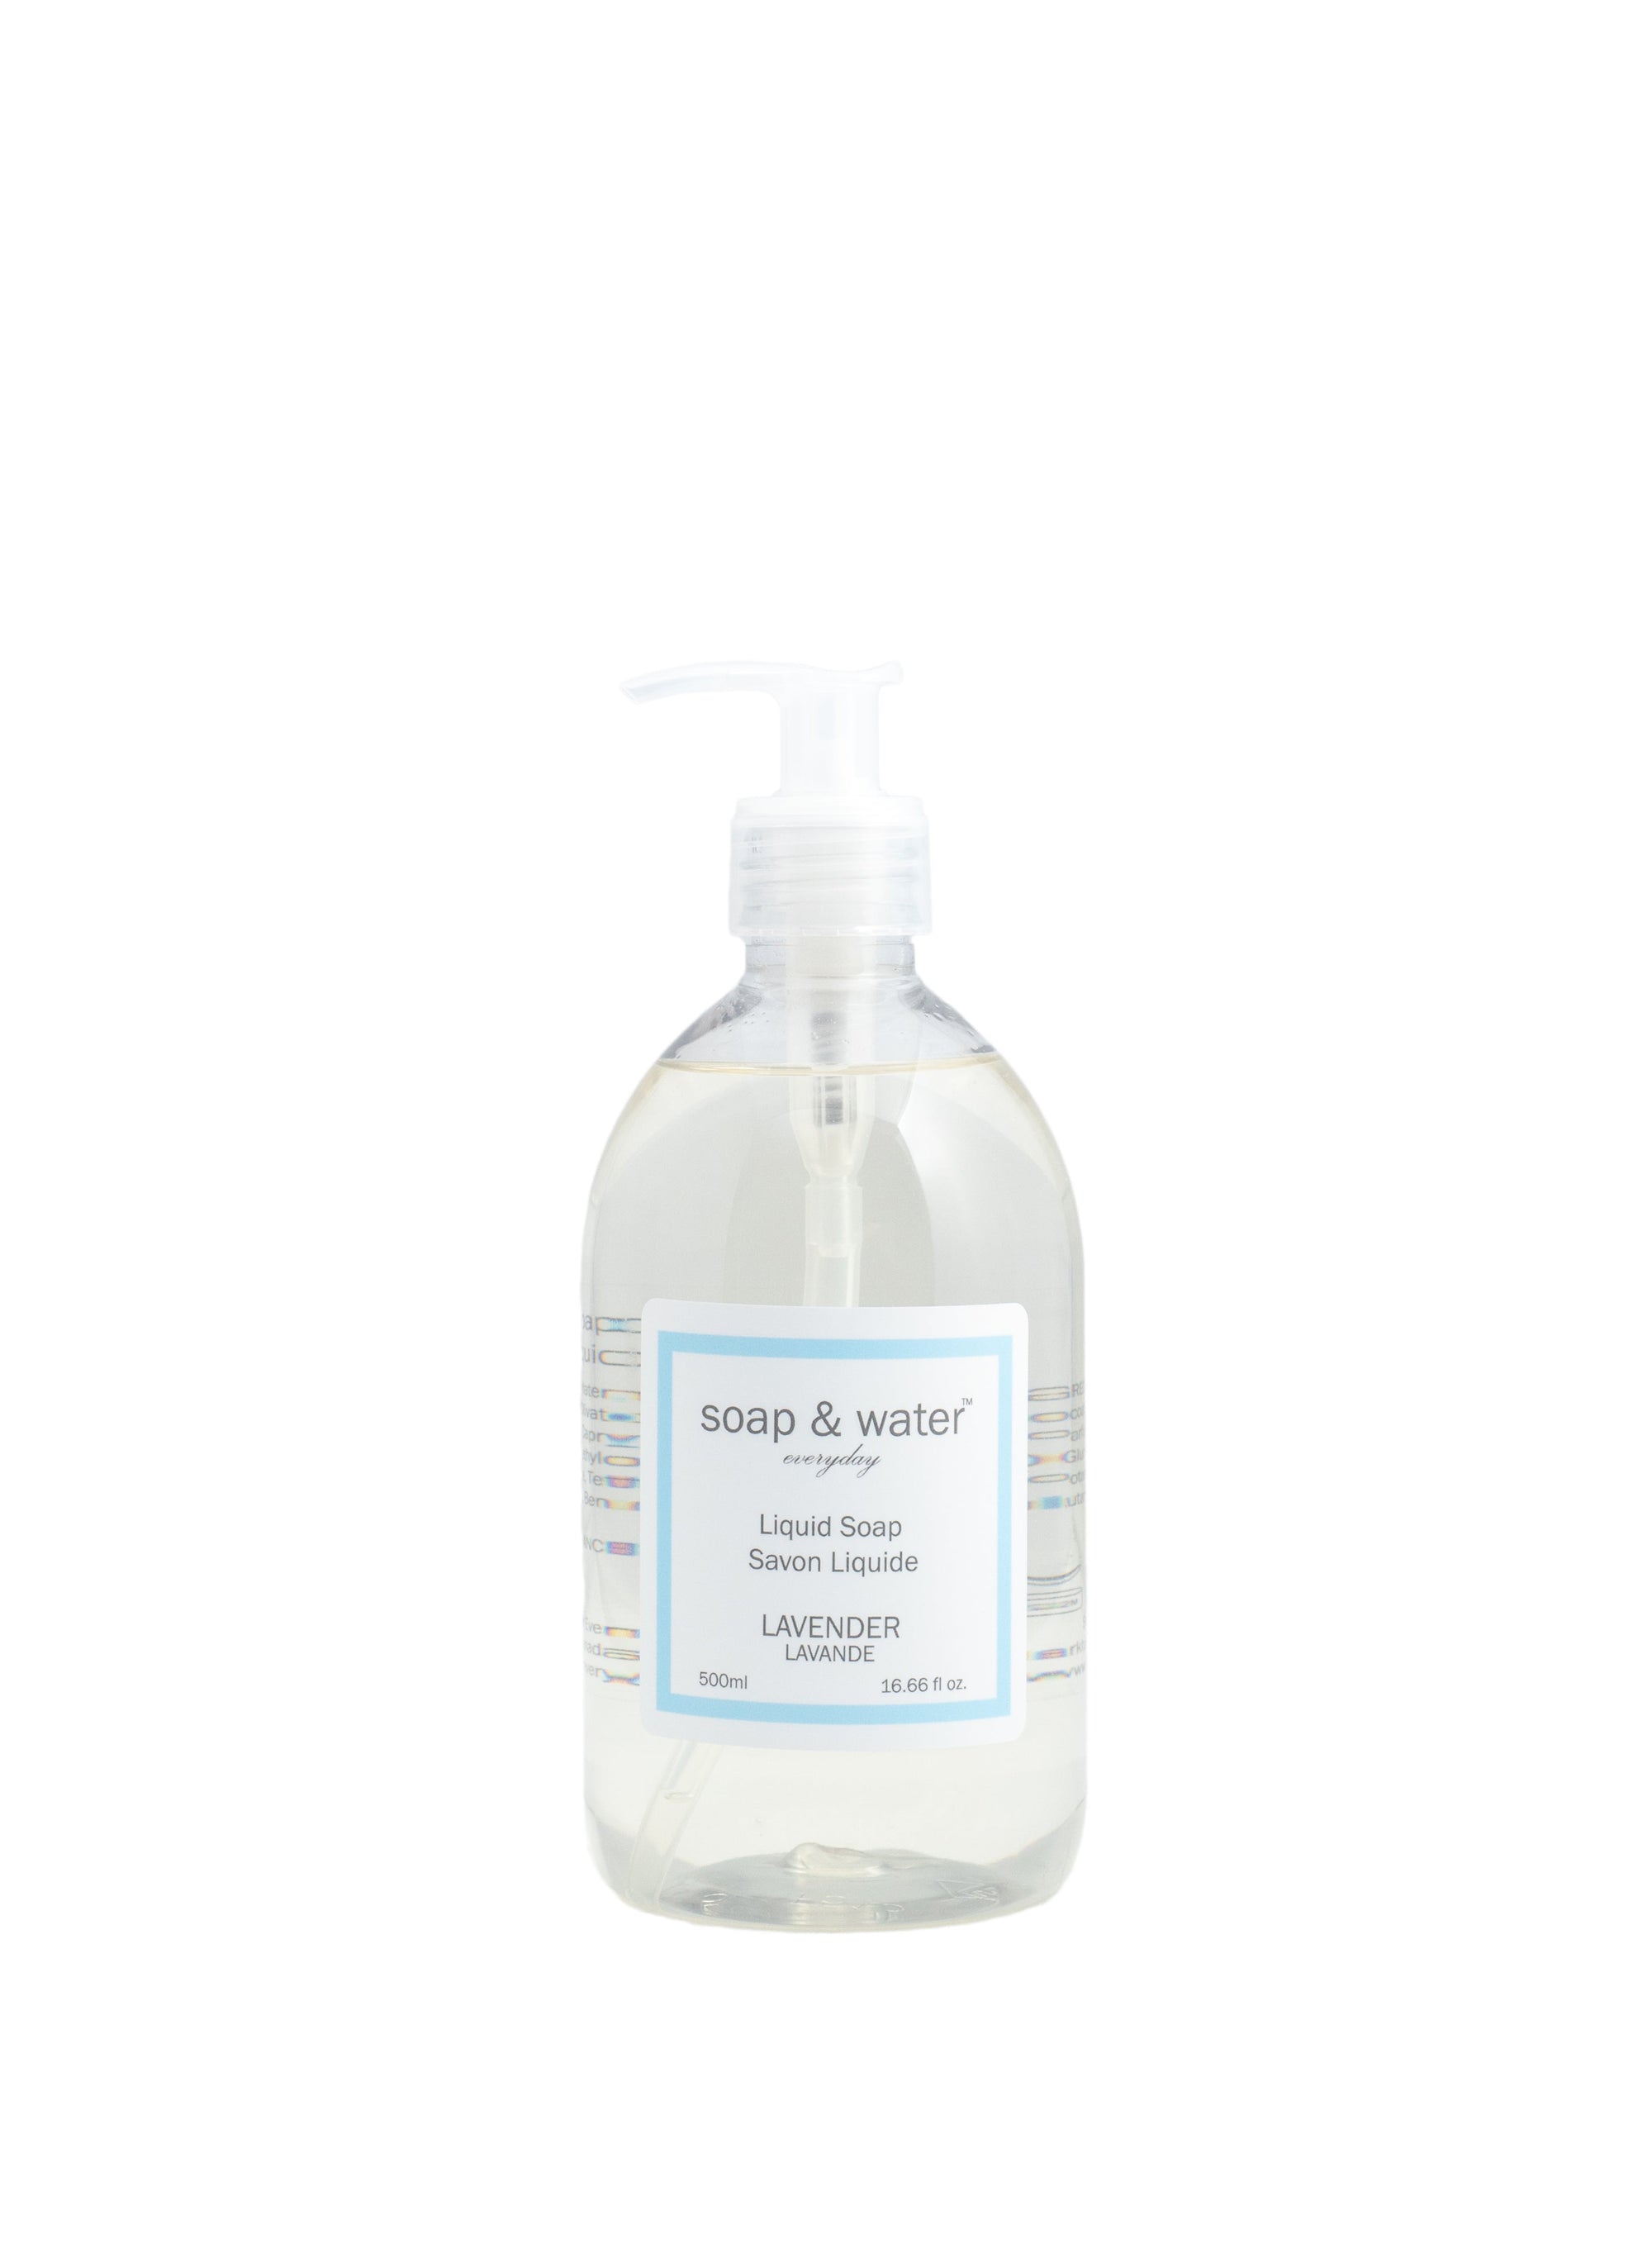 Soap & Water Lavender Liquid Soap - 500 ml - Soap & Water Everyday